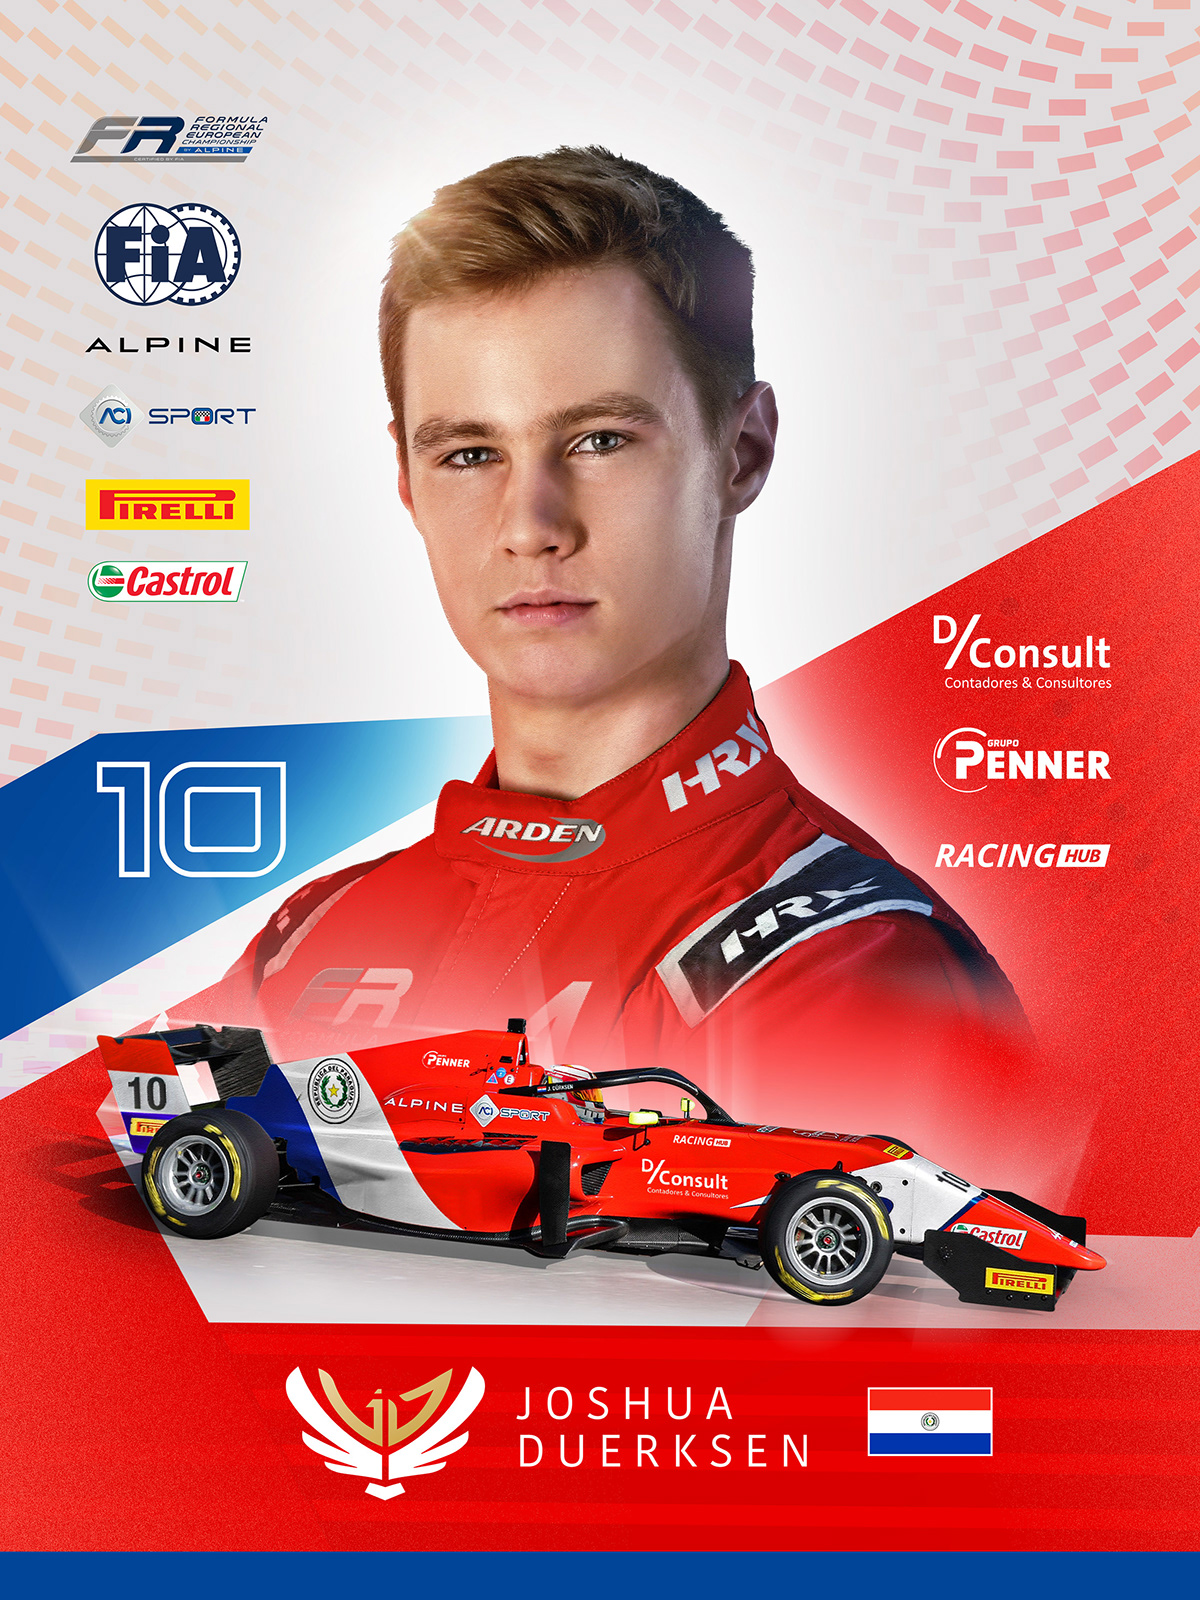 car f3 Monaco paraguay red Vehicle